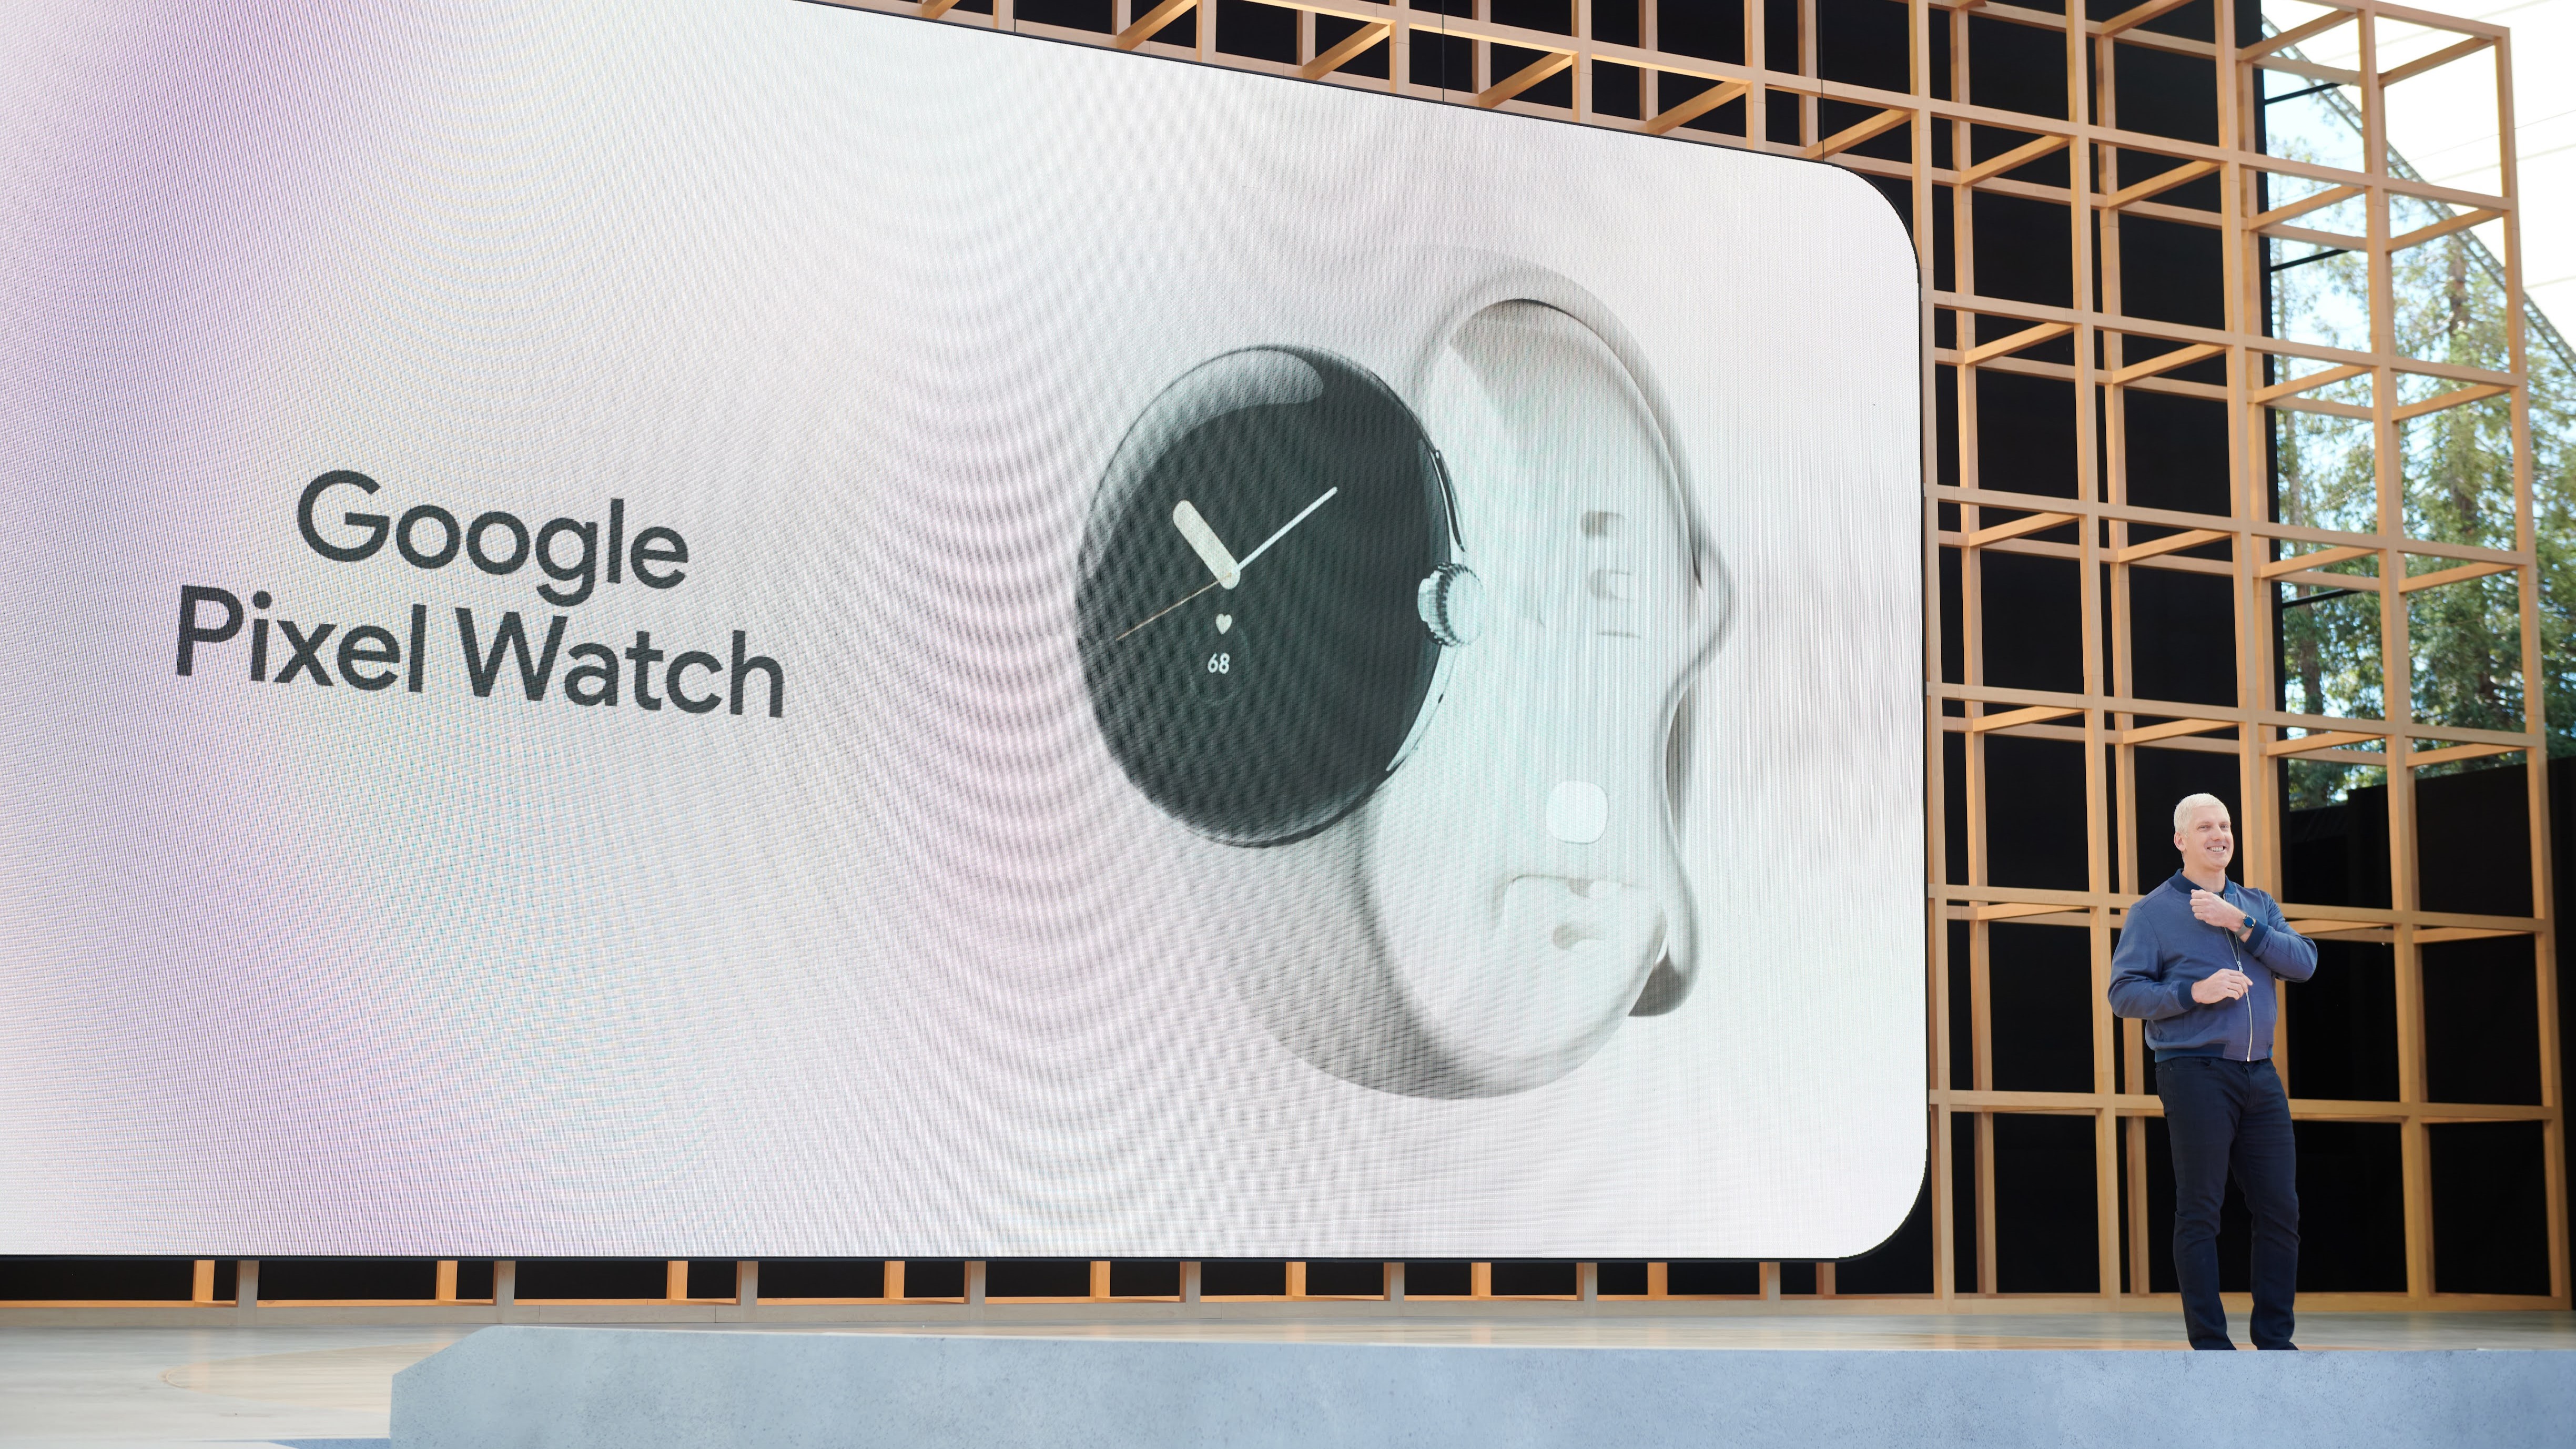 Google Pixel Watch being showcased on stage